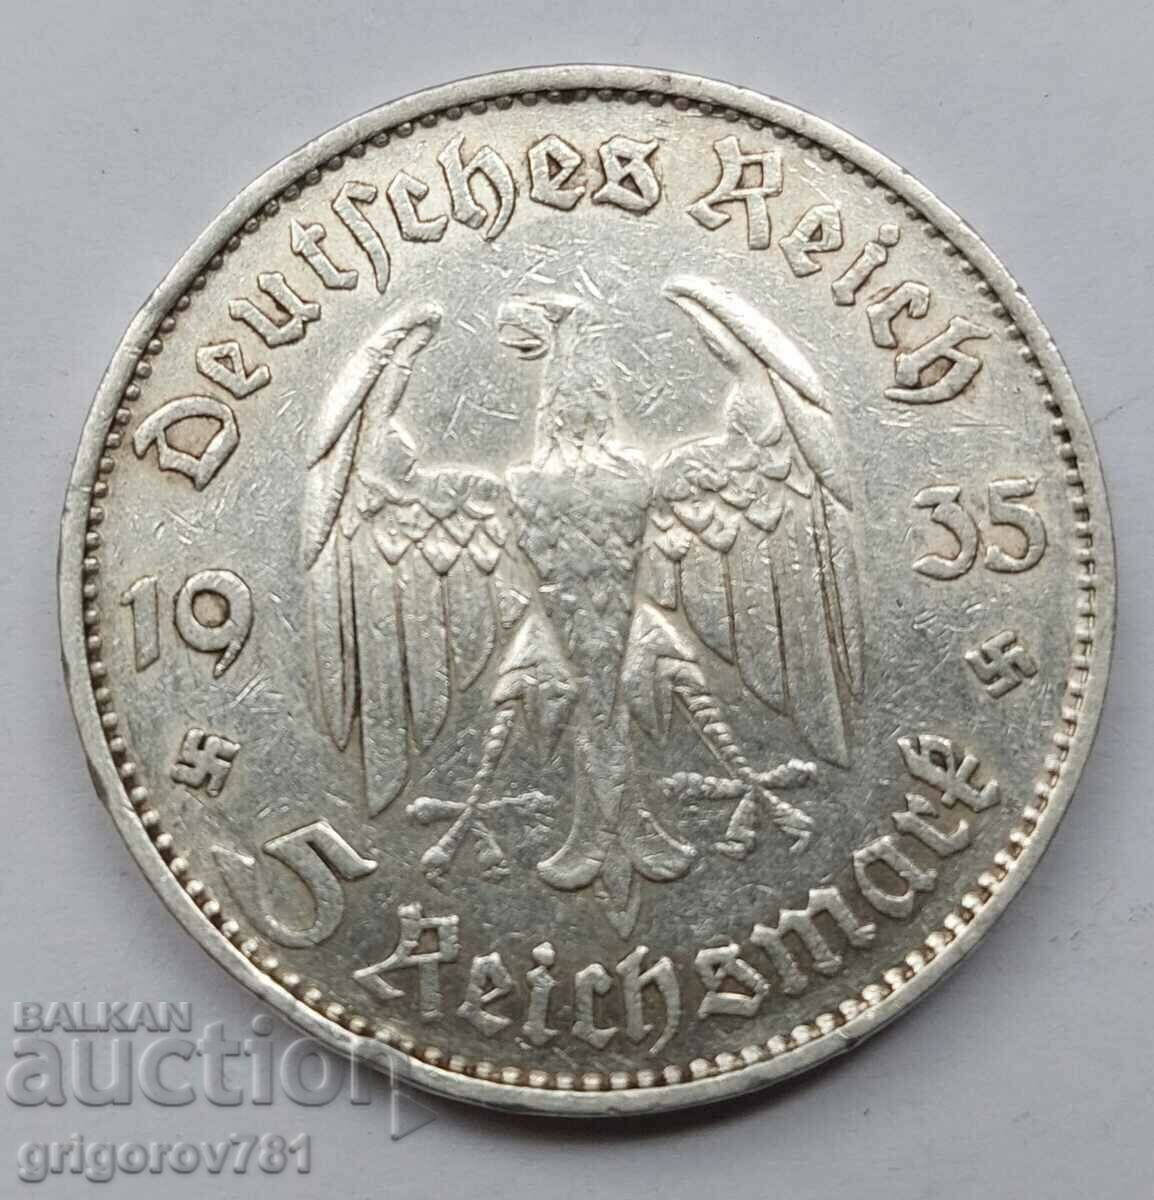 5 Mark Silver Germany 1935 D III Reich Silver Coin #1